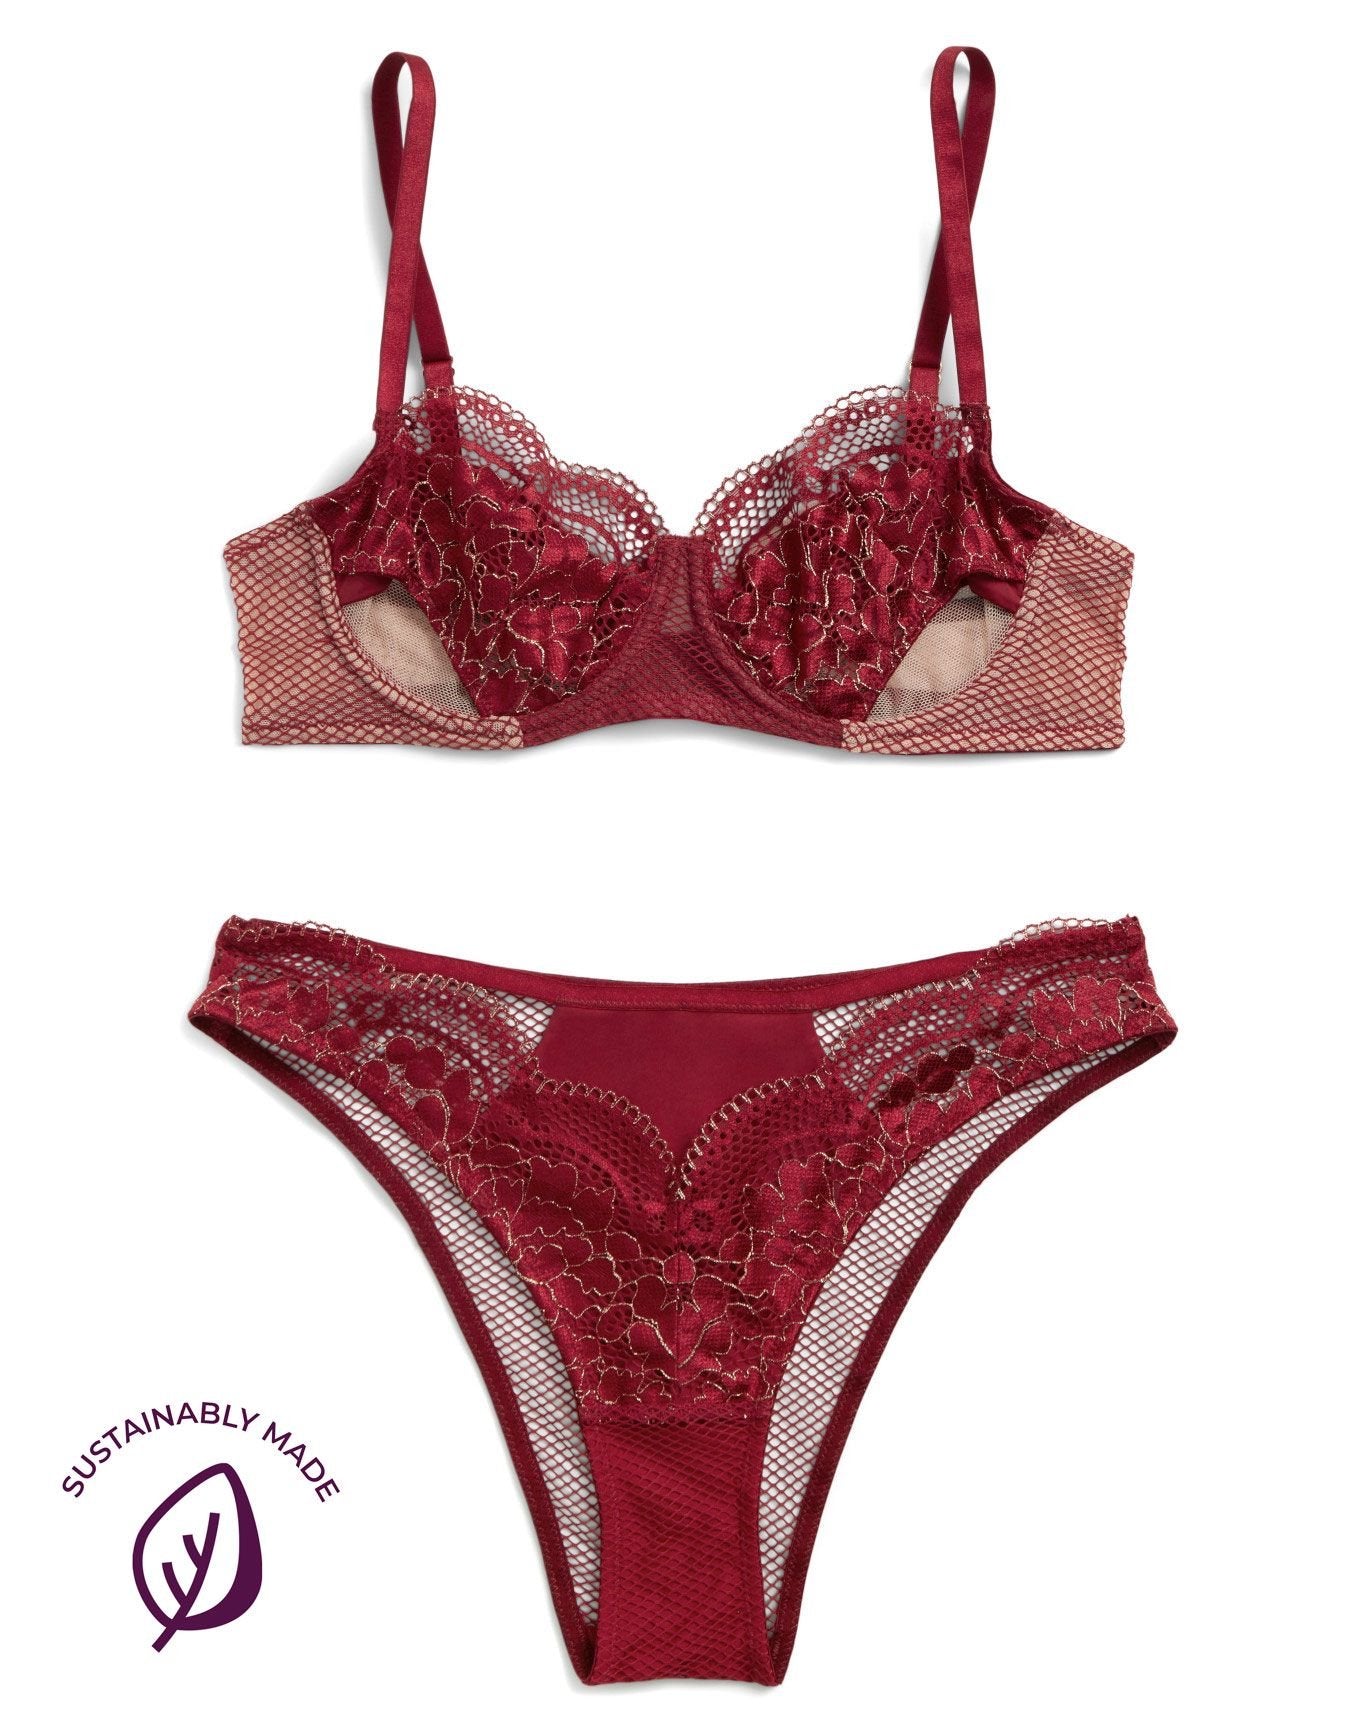 Adore Me Farina Unlined Balconette in color Rhubarb and shape balconette